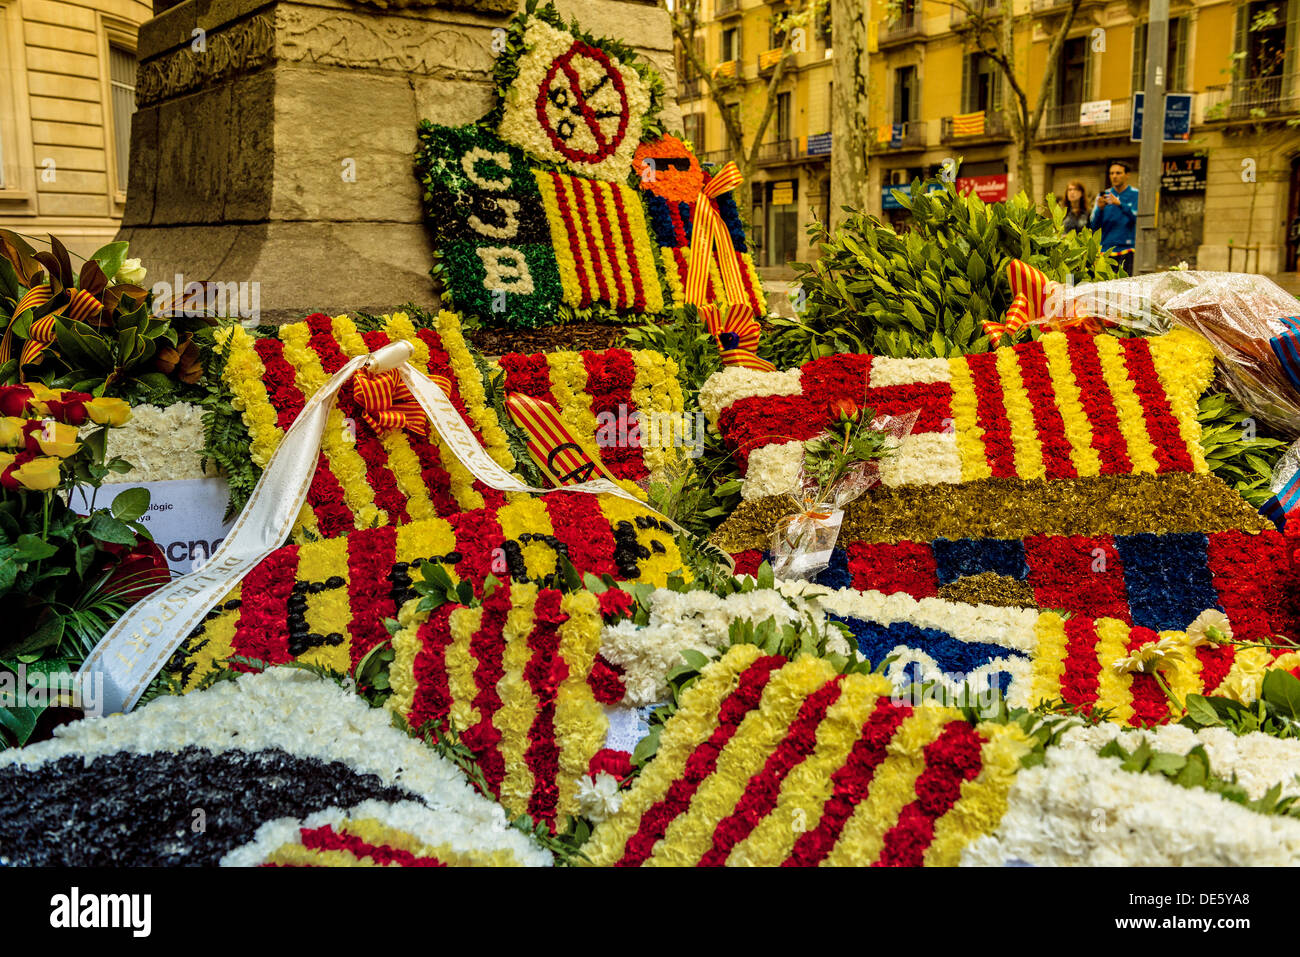 Barcelona, Spain. September 11th, 2013: One of the traditional acts of the National Day of Catalonia is that carried out by the Catalan institutions, most of the Catalan political forces, and representatives of major cultural, social and sports associations from Catalonia like FC Barcelona, who present wreaths and floral decorations at the foot of the monument. © matthi/Alamy Live News Stock Photo